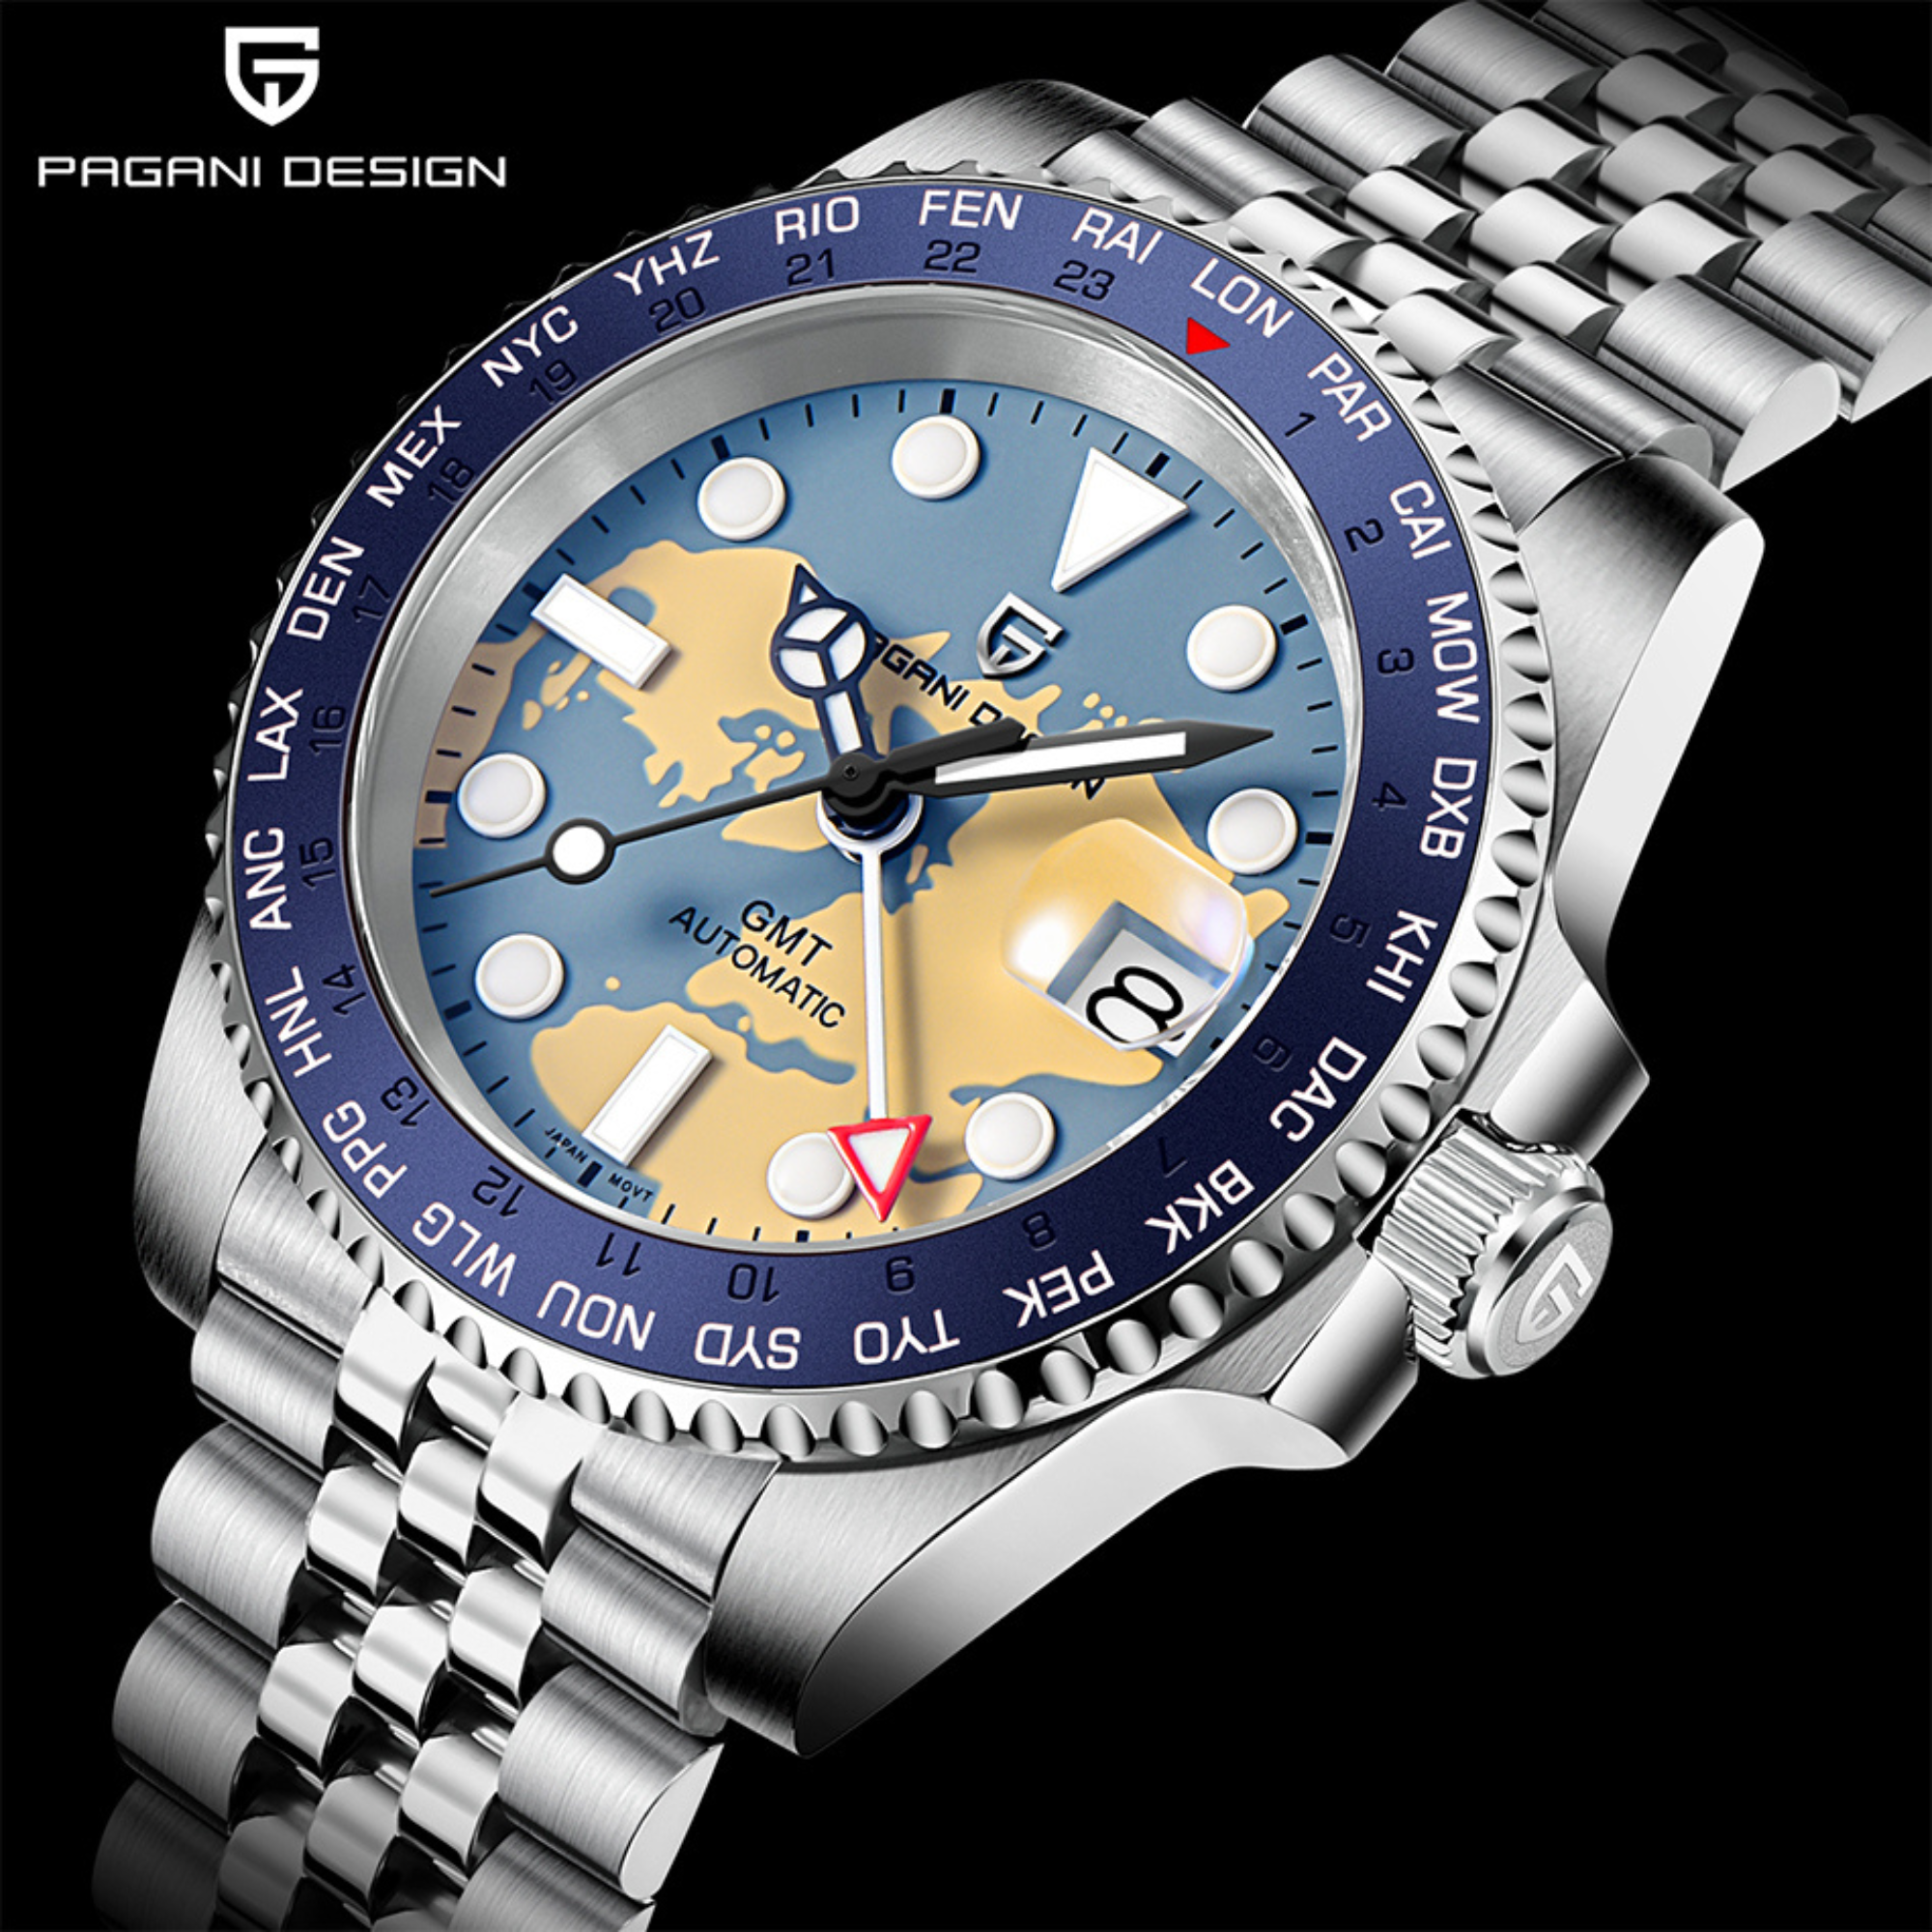 Pagani Design PD-1758 Seiko NH34 Movement equipped with AR AF Anti-Radiation Coating Automatic Watch Stainless Steel Men's ( Blue Map - Jubilee Bracelet)